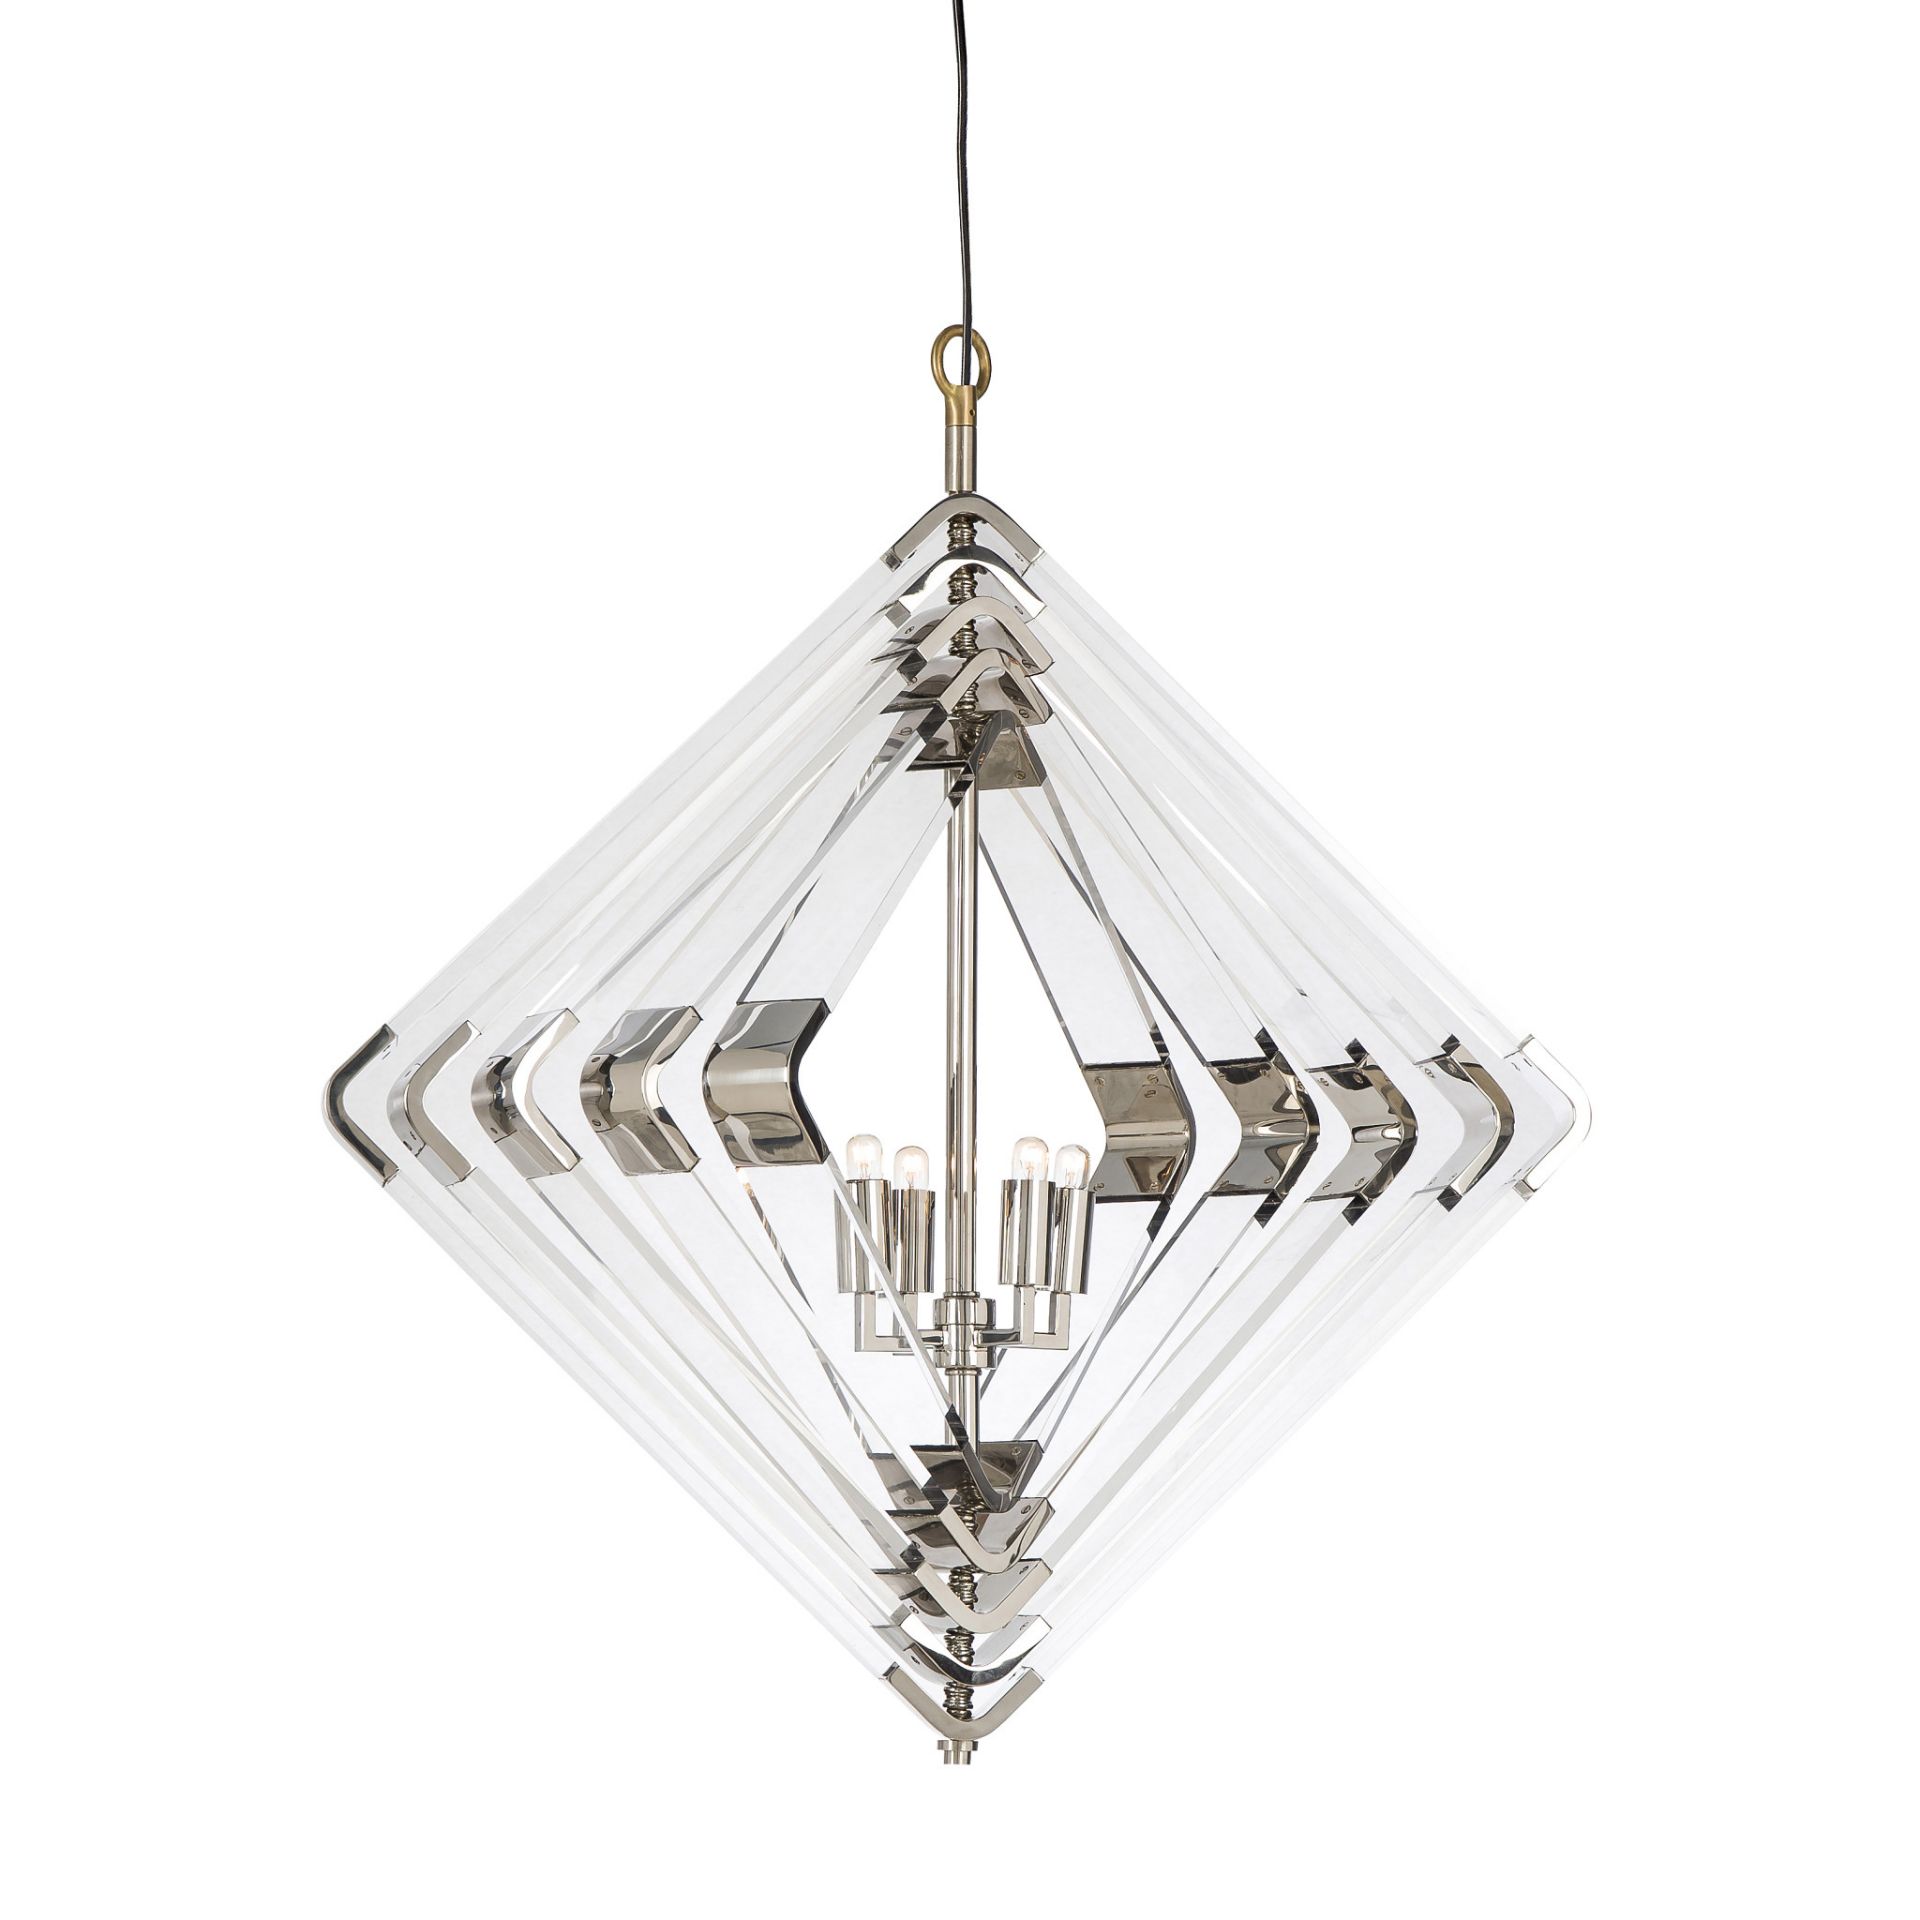 1 x Sonder Living Spiral Acrylic Diamond Light with Nickel Finish - New Boxed Stock - Ref: FG1007210 - Image 3 of 4